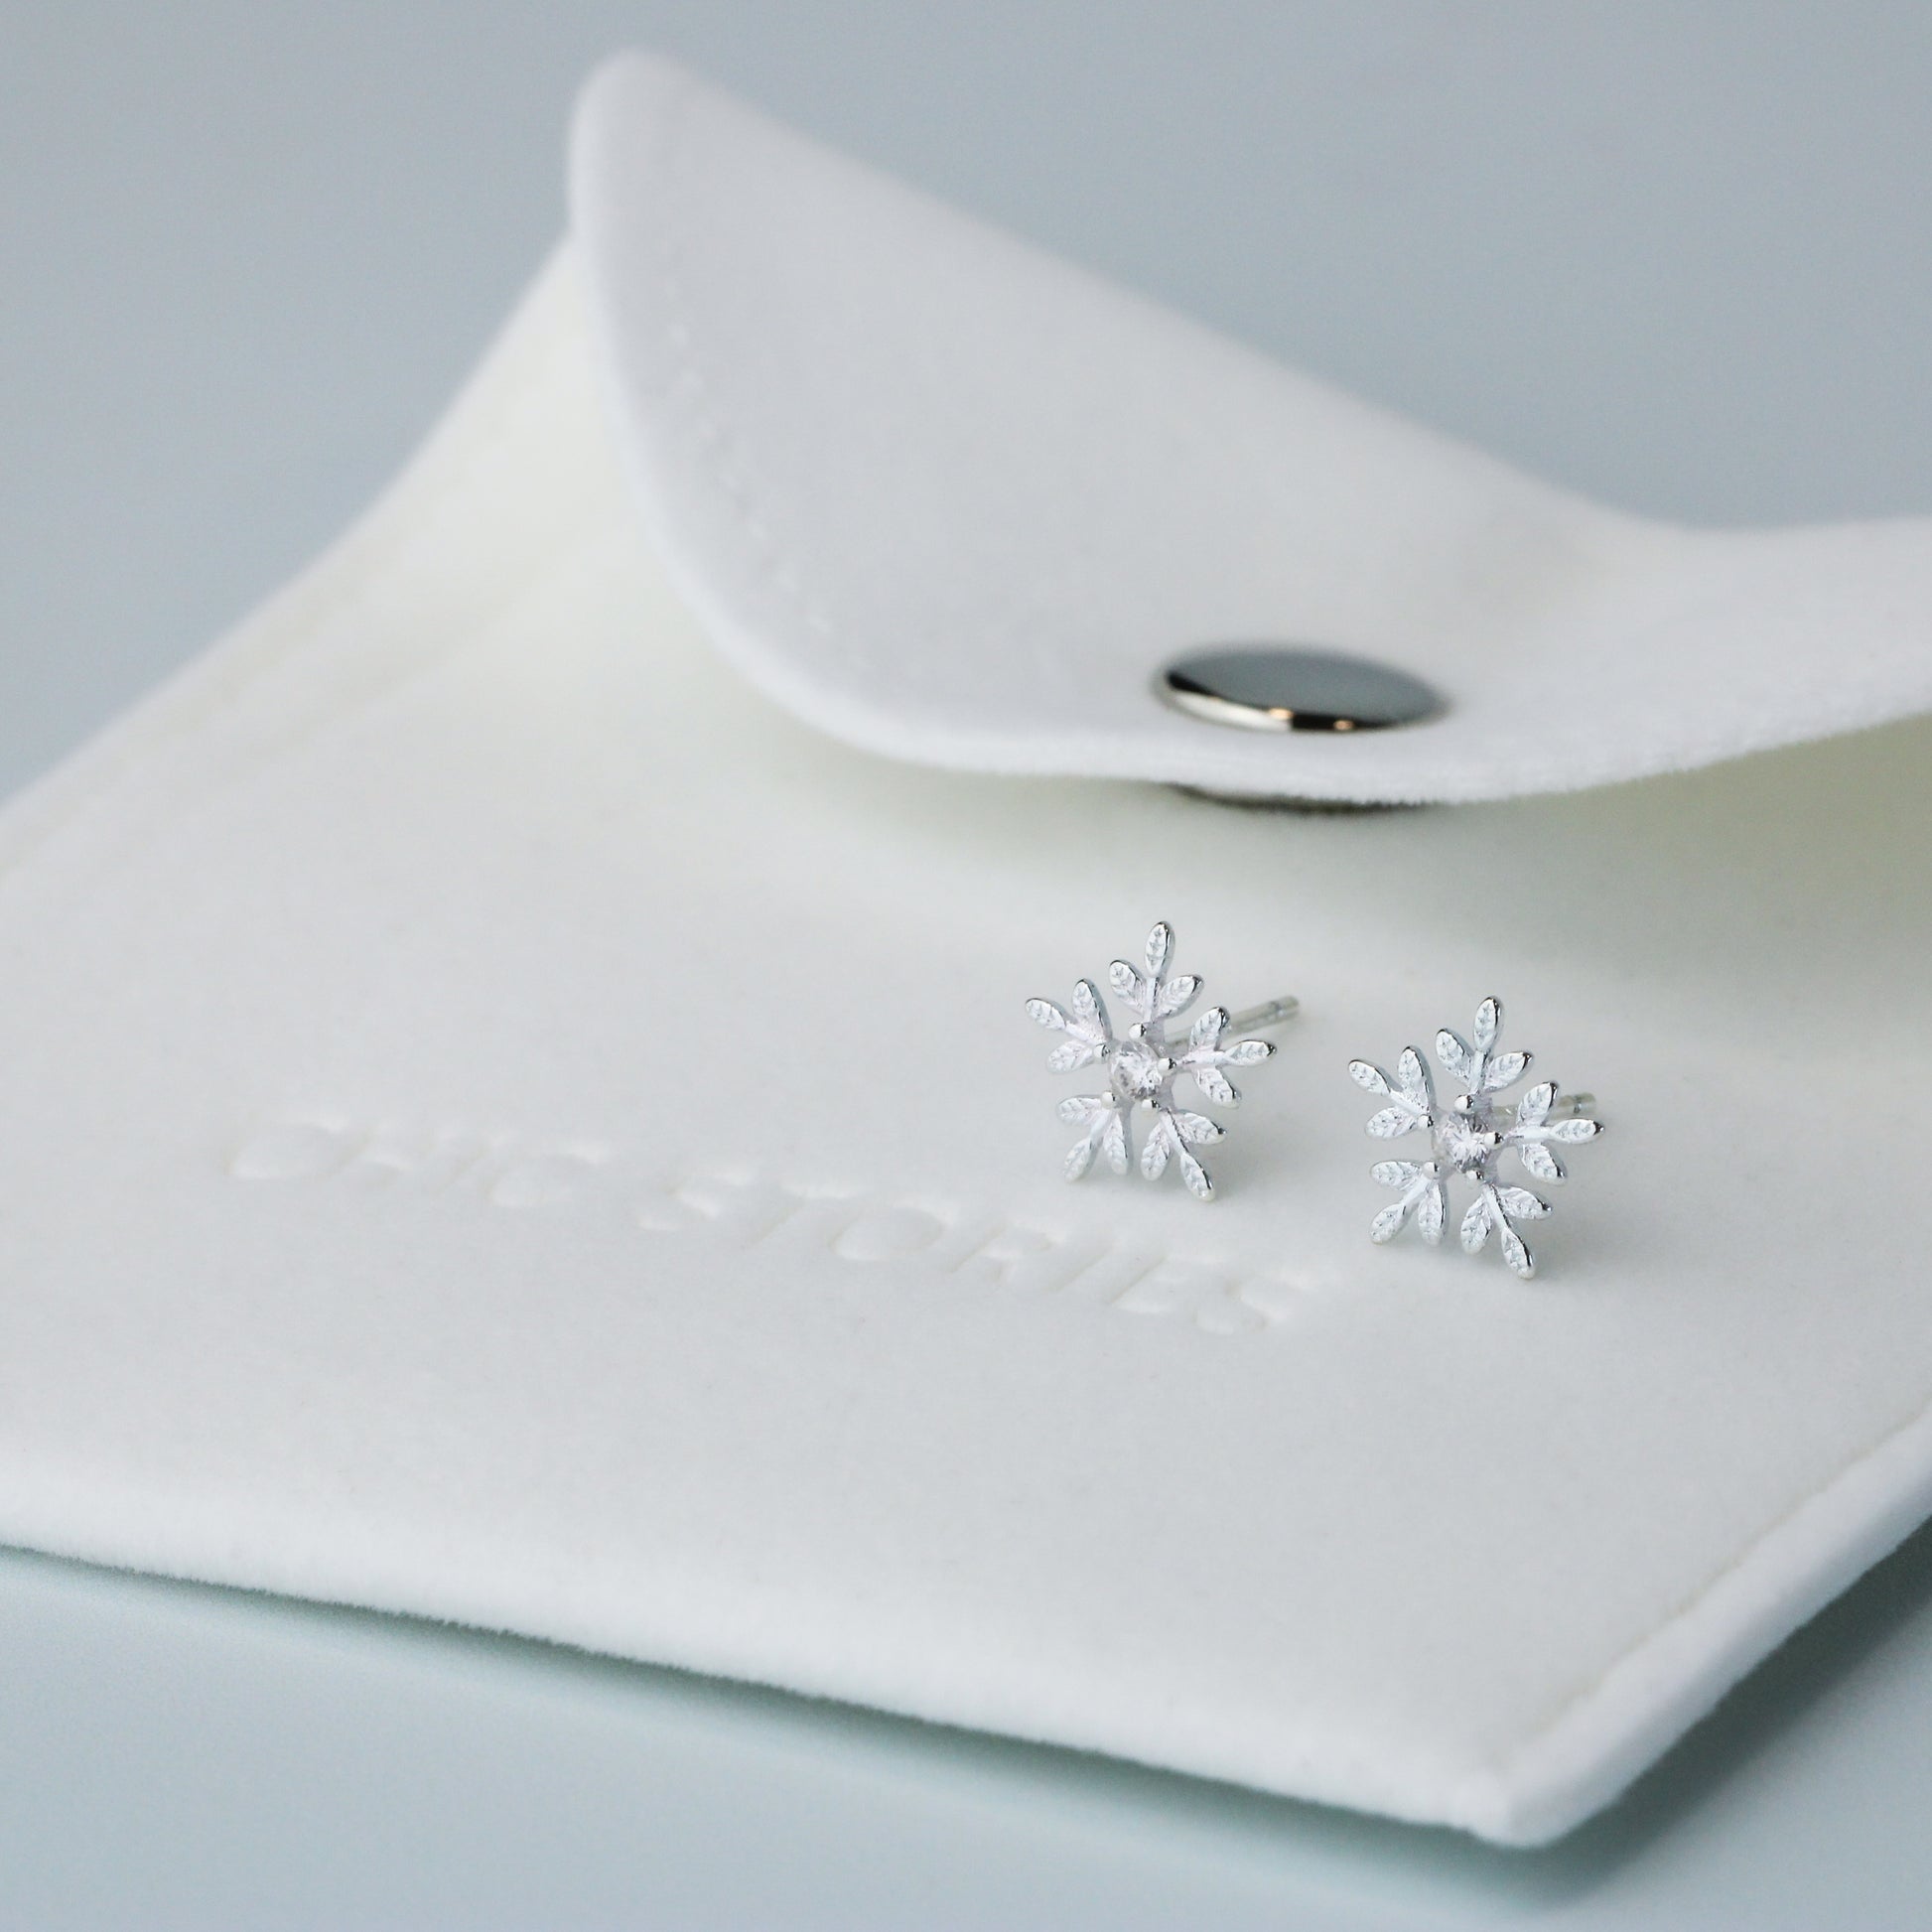 Silver snowflake shape stud earrings with a white crystal detail in the centre. They are sitting on top of a white felt jewellery pouch, embossed with 'Chic Stories".